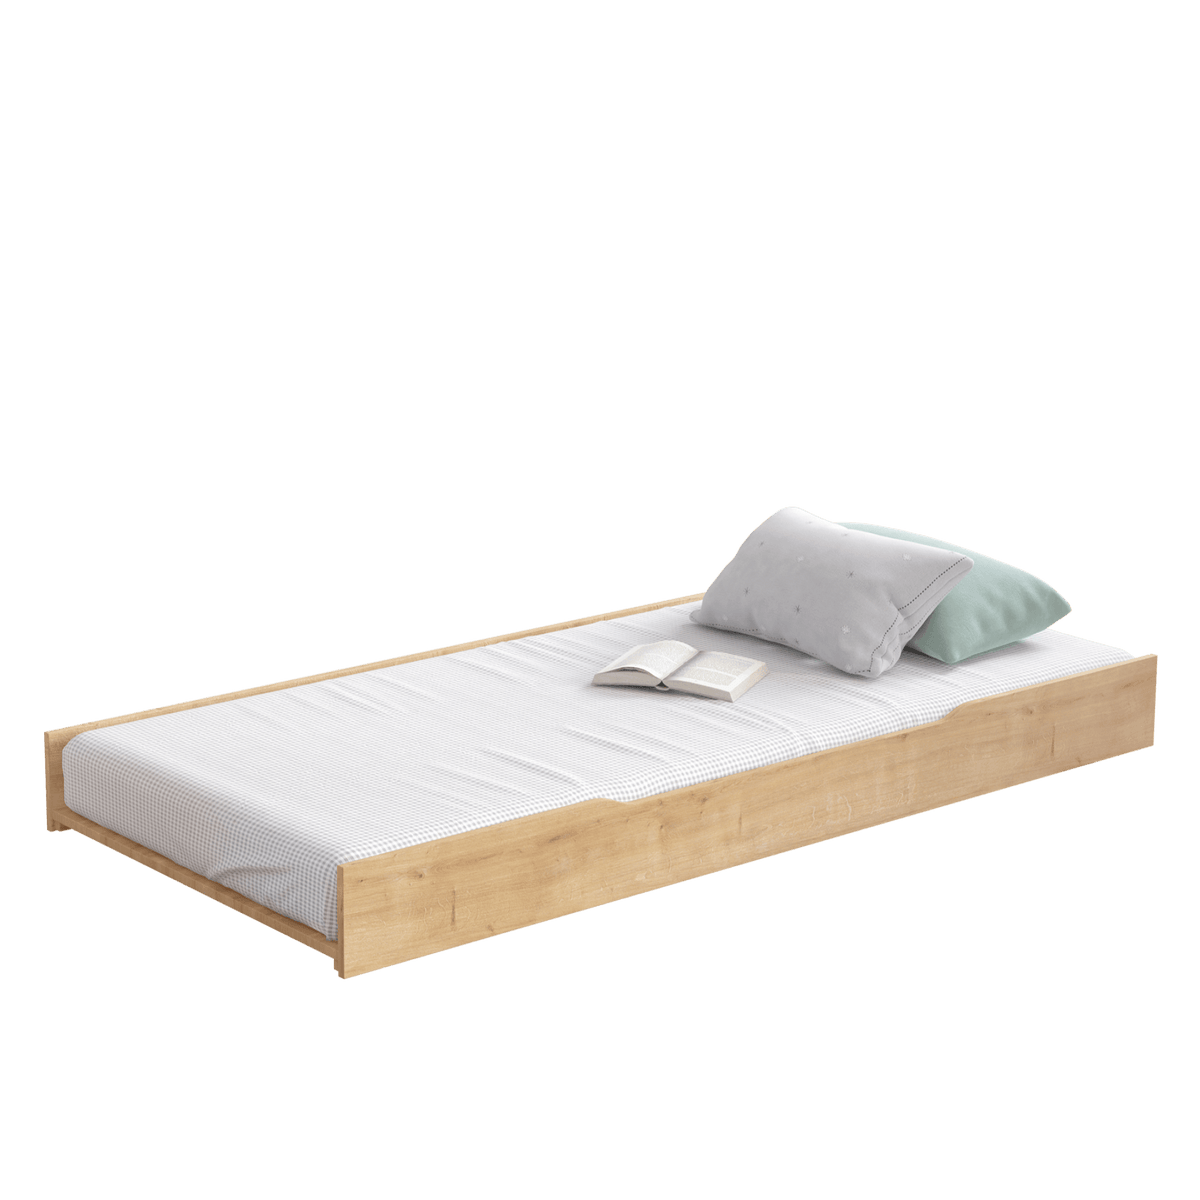 Cilek Daybed Pull-Out Bed (90X200 Cm) (Mocha) - Kids Haven